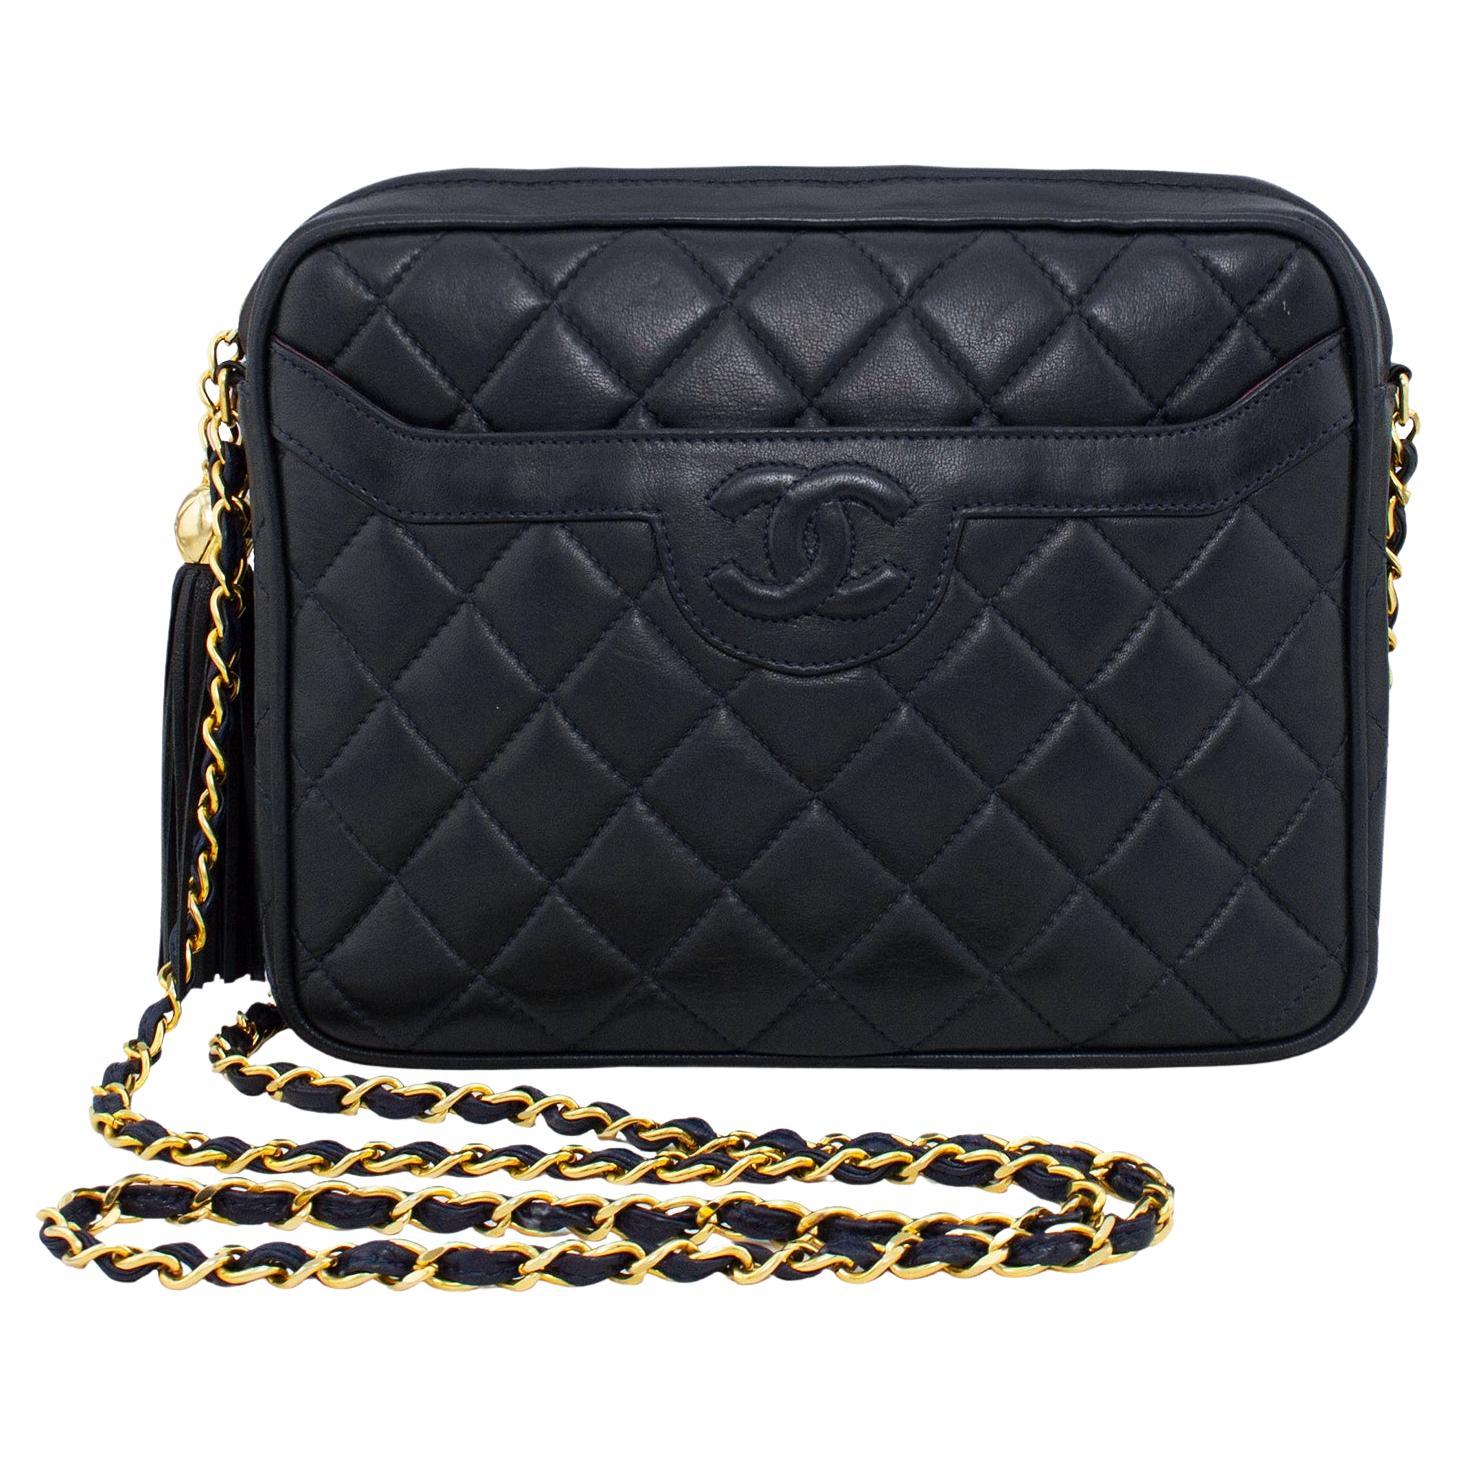 1980s Chanel Navy Blue Quilted Leather Large Camera Bag